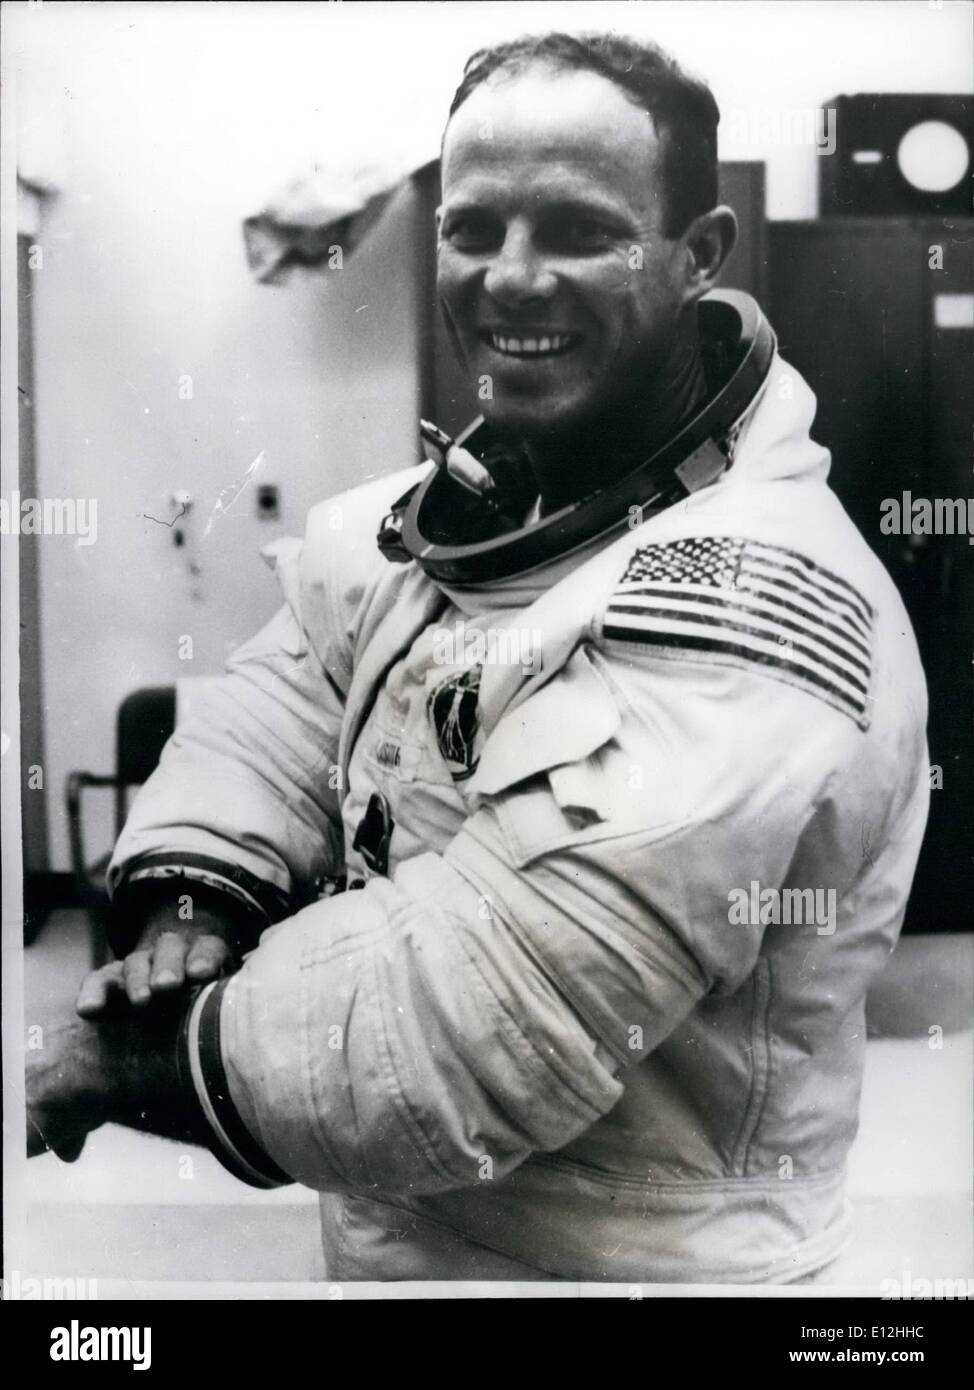 Feb. 24, 2012 - Member of Crrw of second manned Skylab mission: Photo shows Skylab 3 astronaut Jack R. Lousma, Pilot of the second manned Skylab mission due for launch on July 28th. He is seen duri ga suit-up exercise. Stock Photo